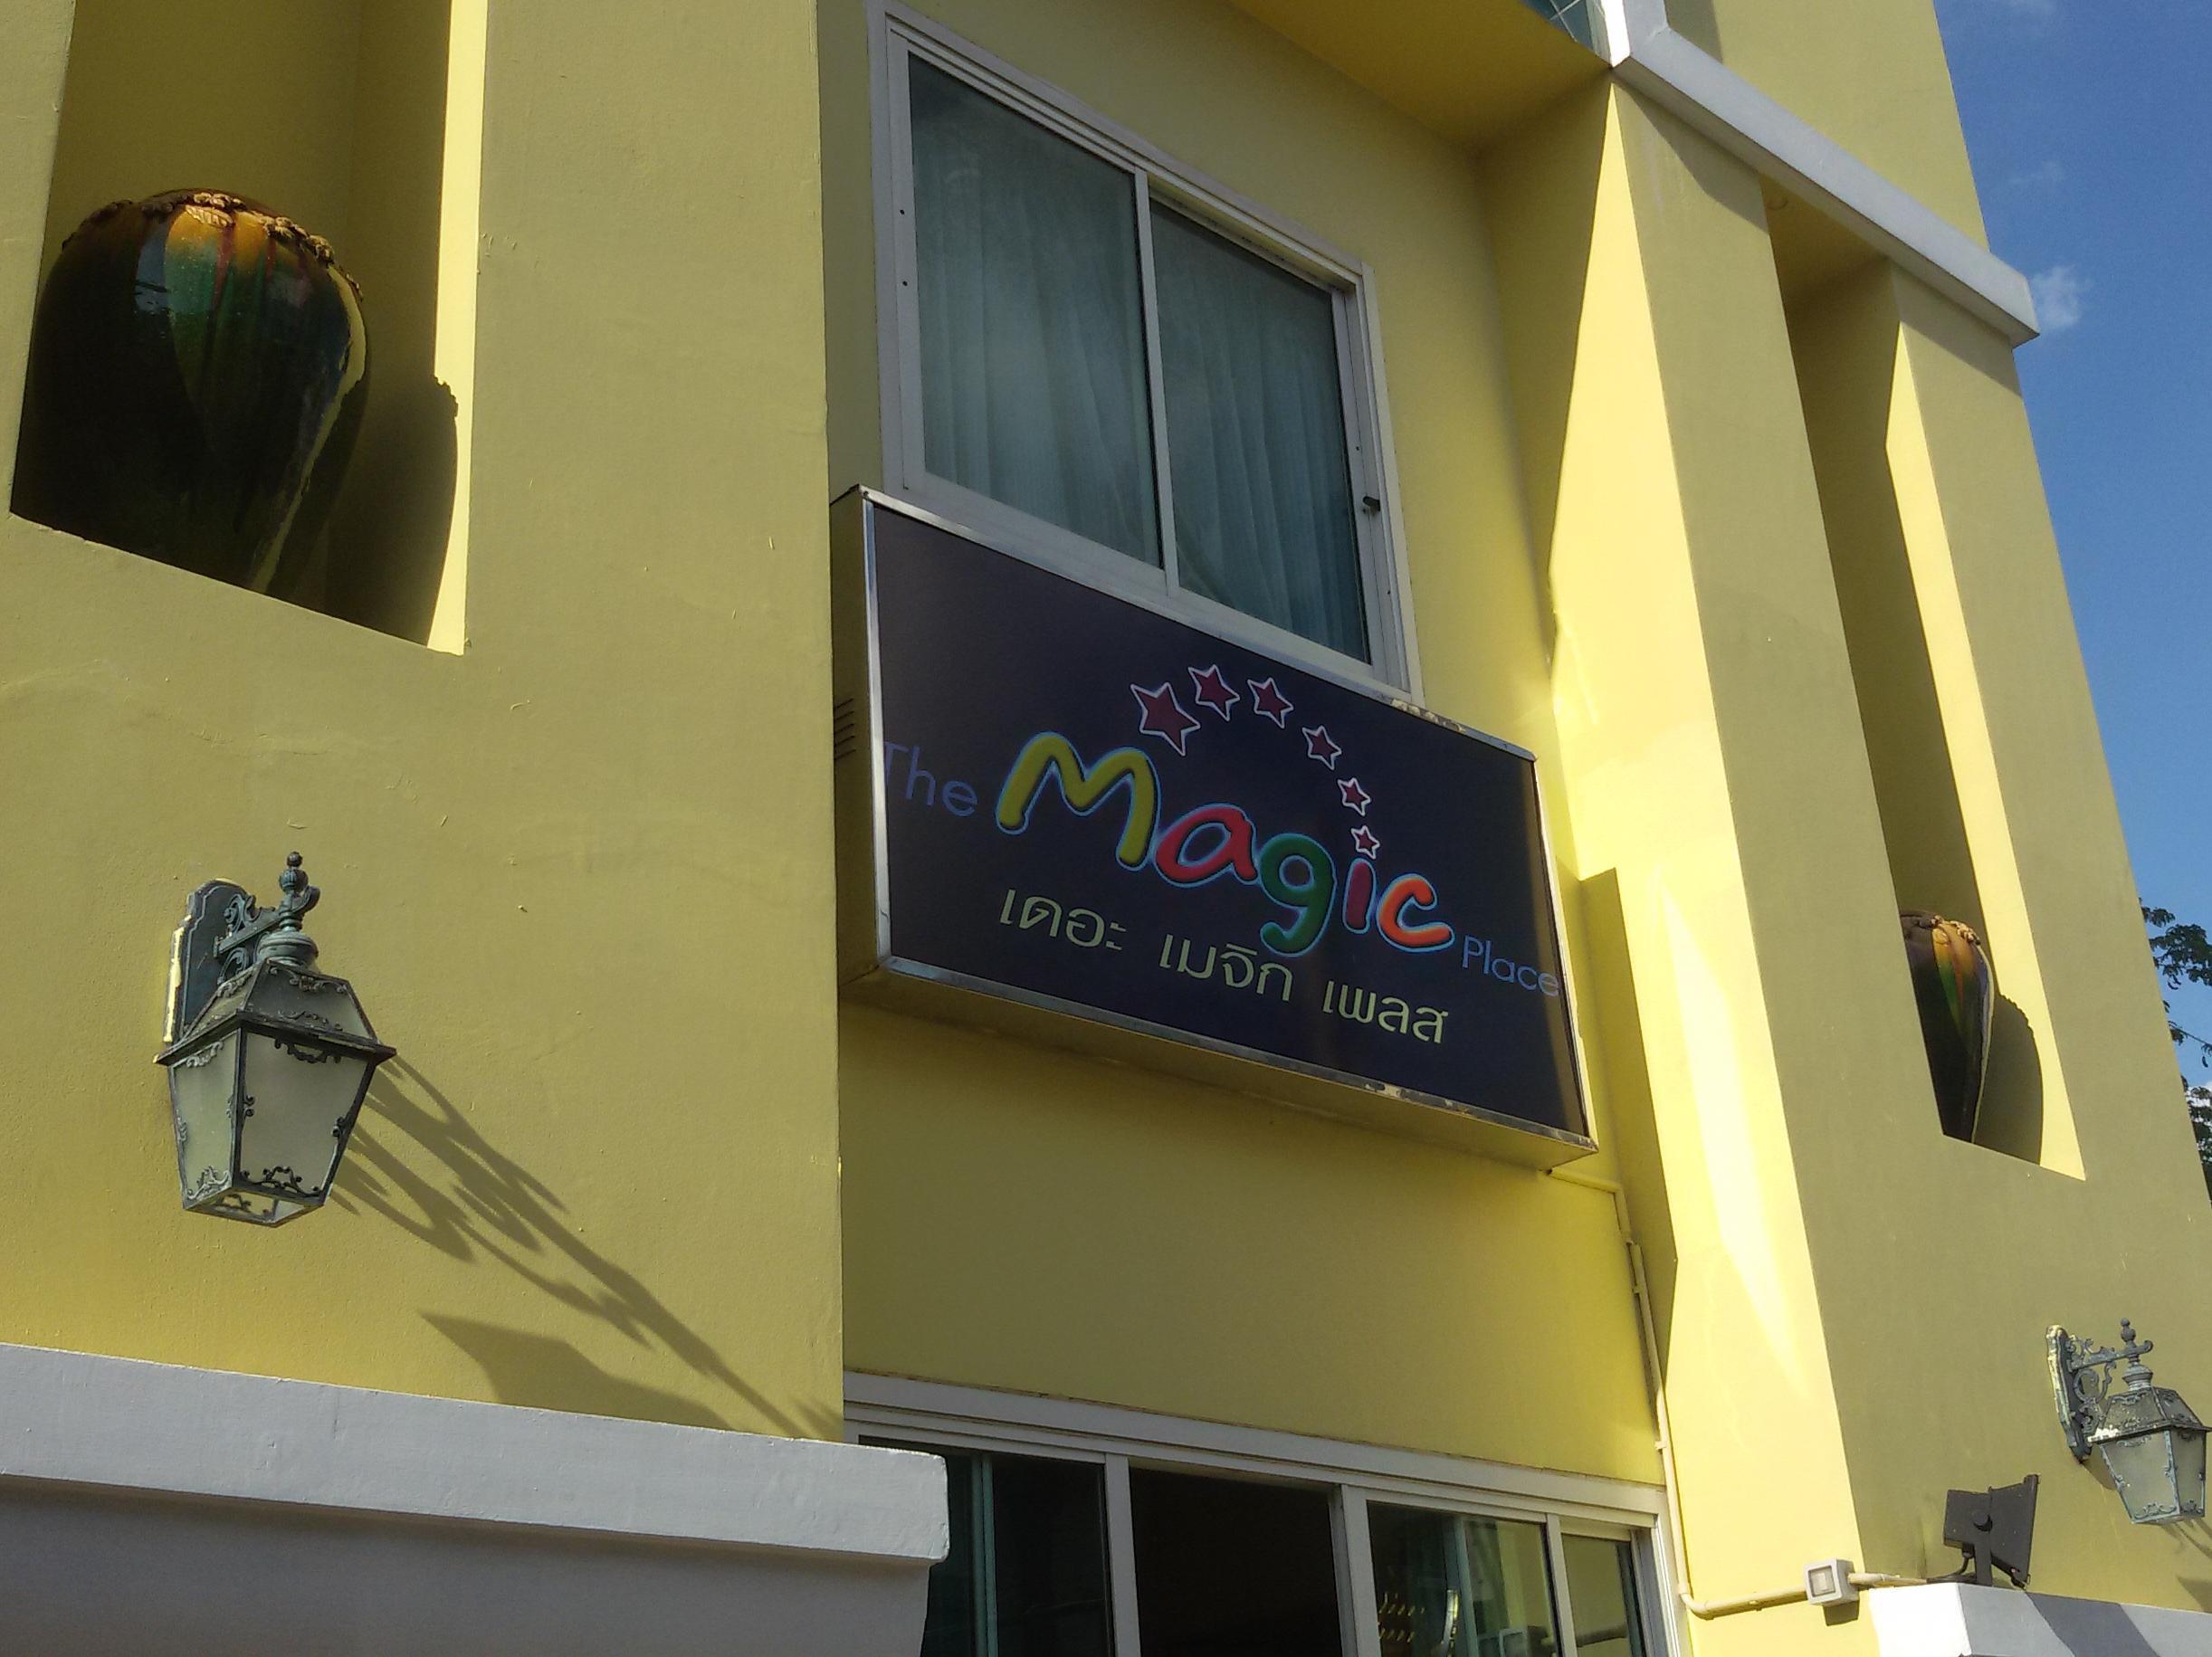 The Magic Place Thailand FAQ 2016, What facilities are there in The Magic Place Thailand 2016, What Languages Spoken are Supported in The Magic Place Thailand 2016, Which payment cards are accepted in The Magic Place Thailand , Thailand The Magic Place room facilities and services Q&A 2016, Thailand The Magic Place online booking services 2016, Thailand The Magic Place address 2016, Thailand The Magic Place telephone number 2016,Thailand The Magic Place map 2016, Thailand The Magic Place traffic guide 2016, how to go Thailand The Magic Place, Thailand The Magic Place booking online 2016, Thailand The Magic Place room types 2016.